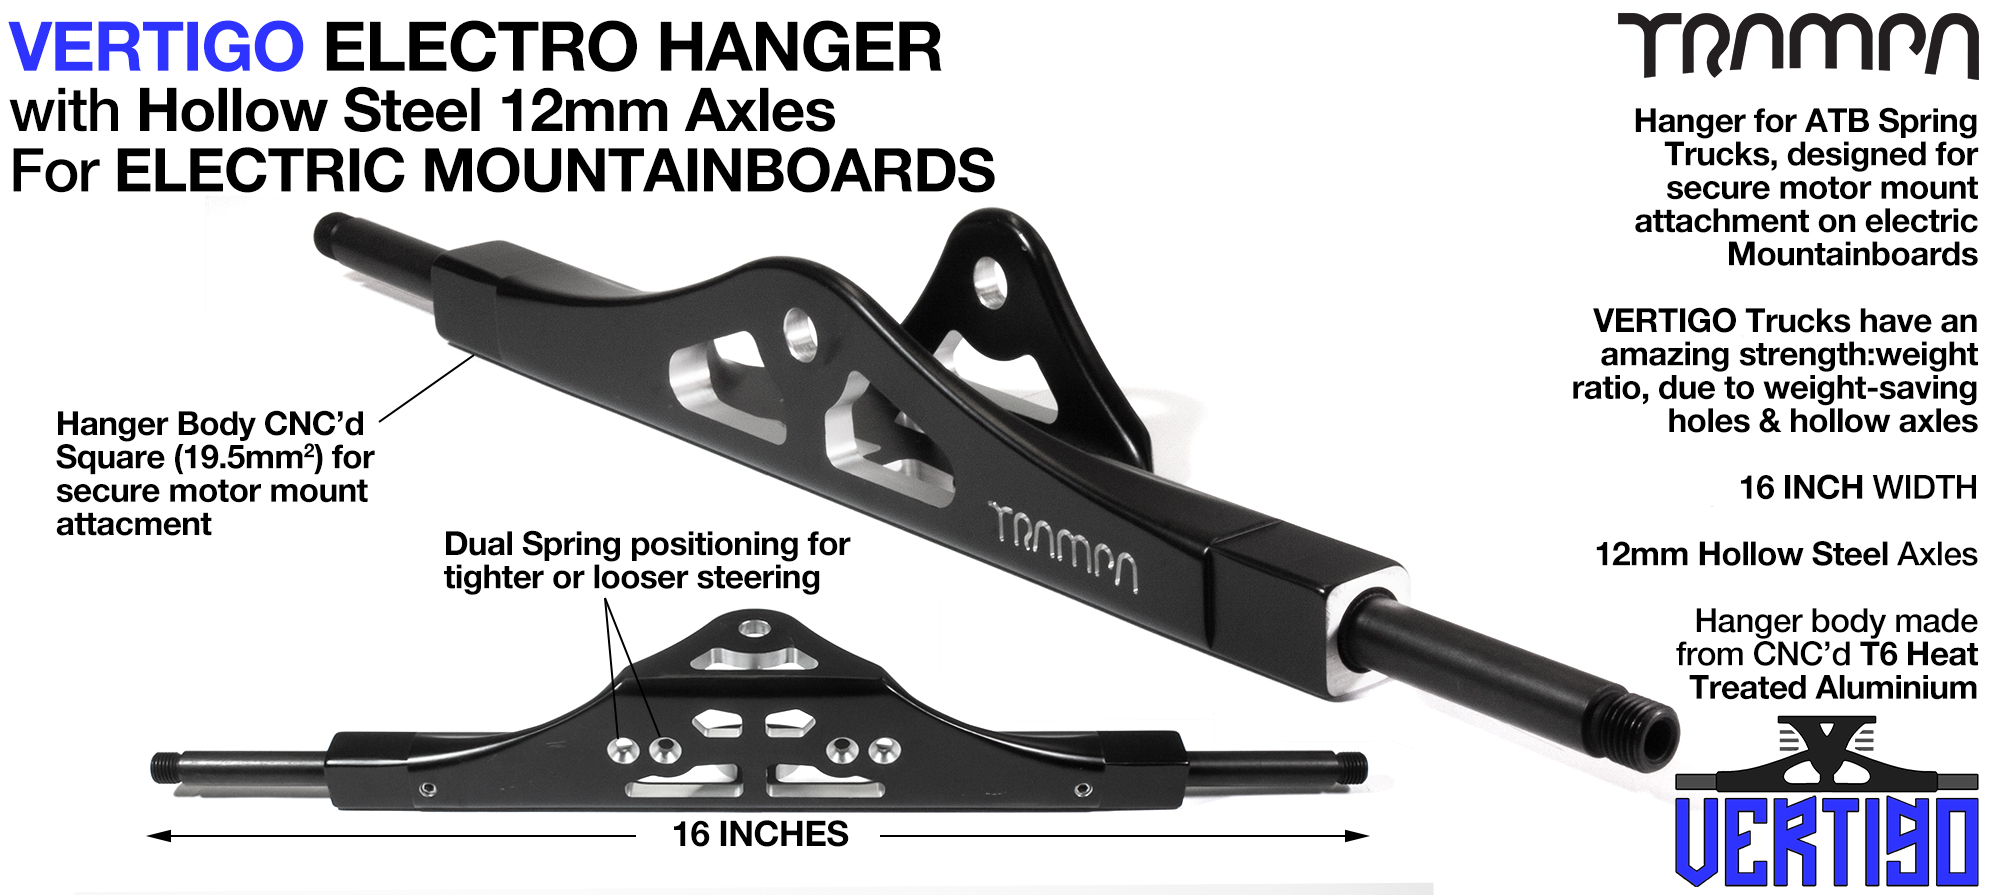 16 inch wide CNC finished VERTIGO Motor Mount Hanger with 12mm HOLLOW Steel Axles - connects with all Spring Truck Baseplates & Mountainboard Motor Mounts